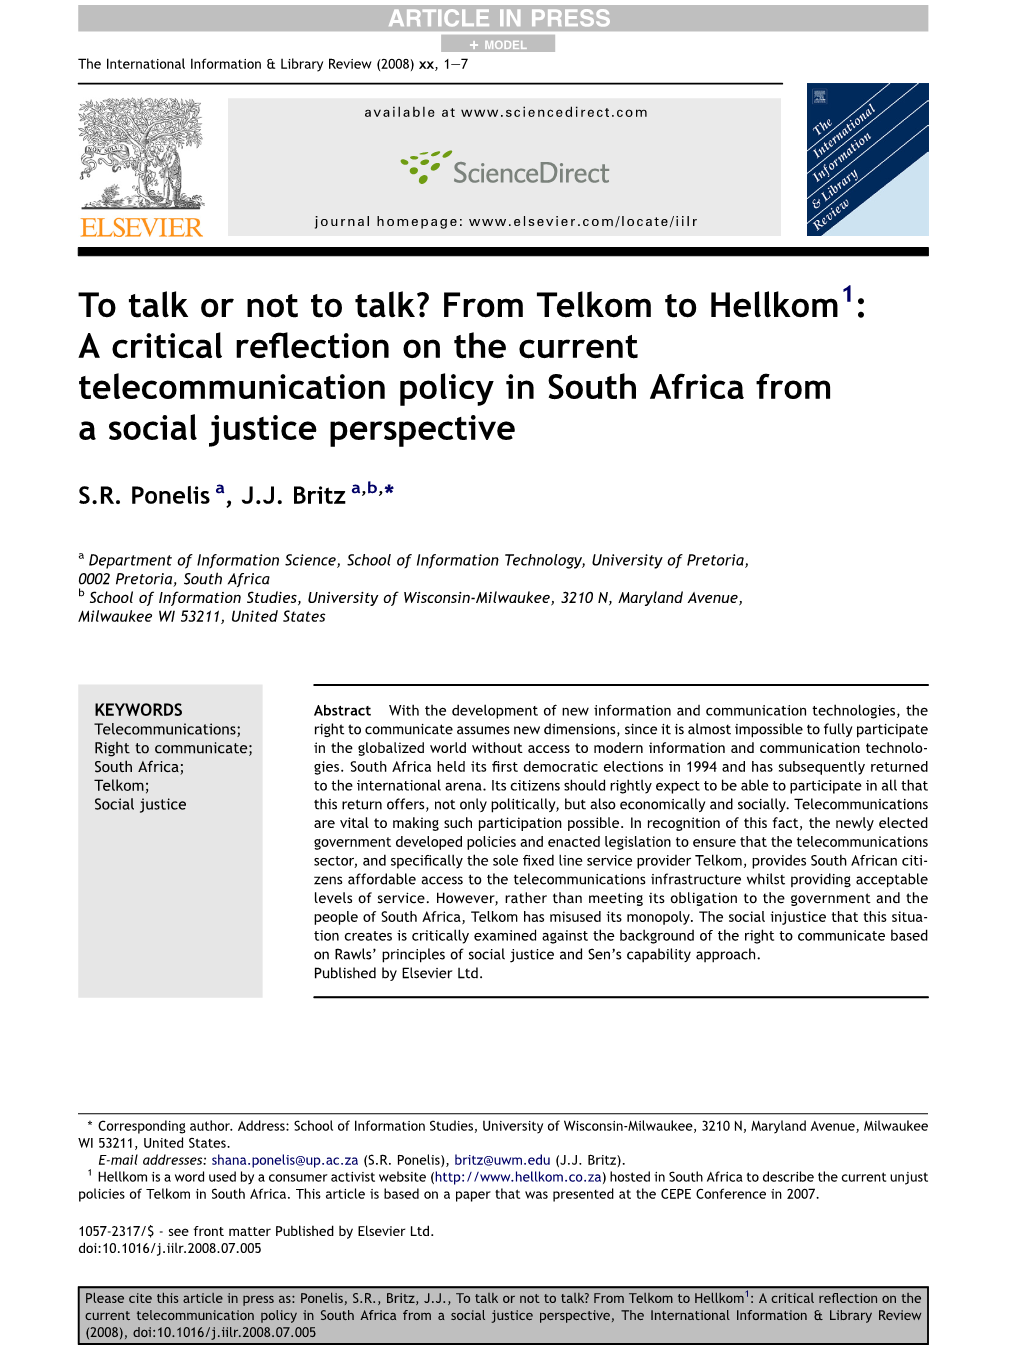 From Telkom to Hellkom1: a Critical Reﬂection on the Current Telecommunication Policy in South Africa from a Social Justice Perspective